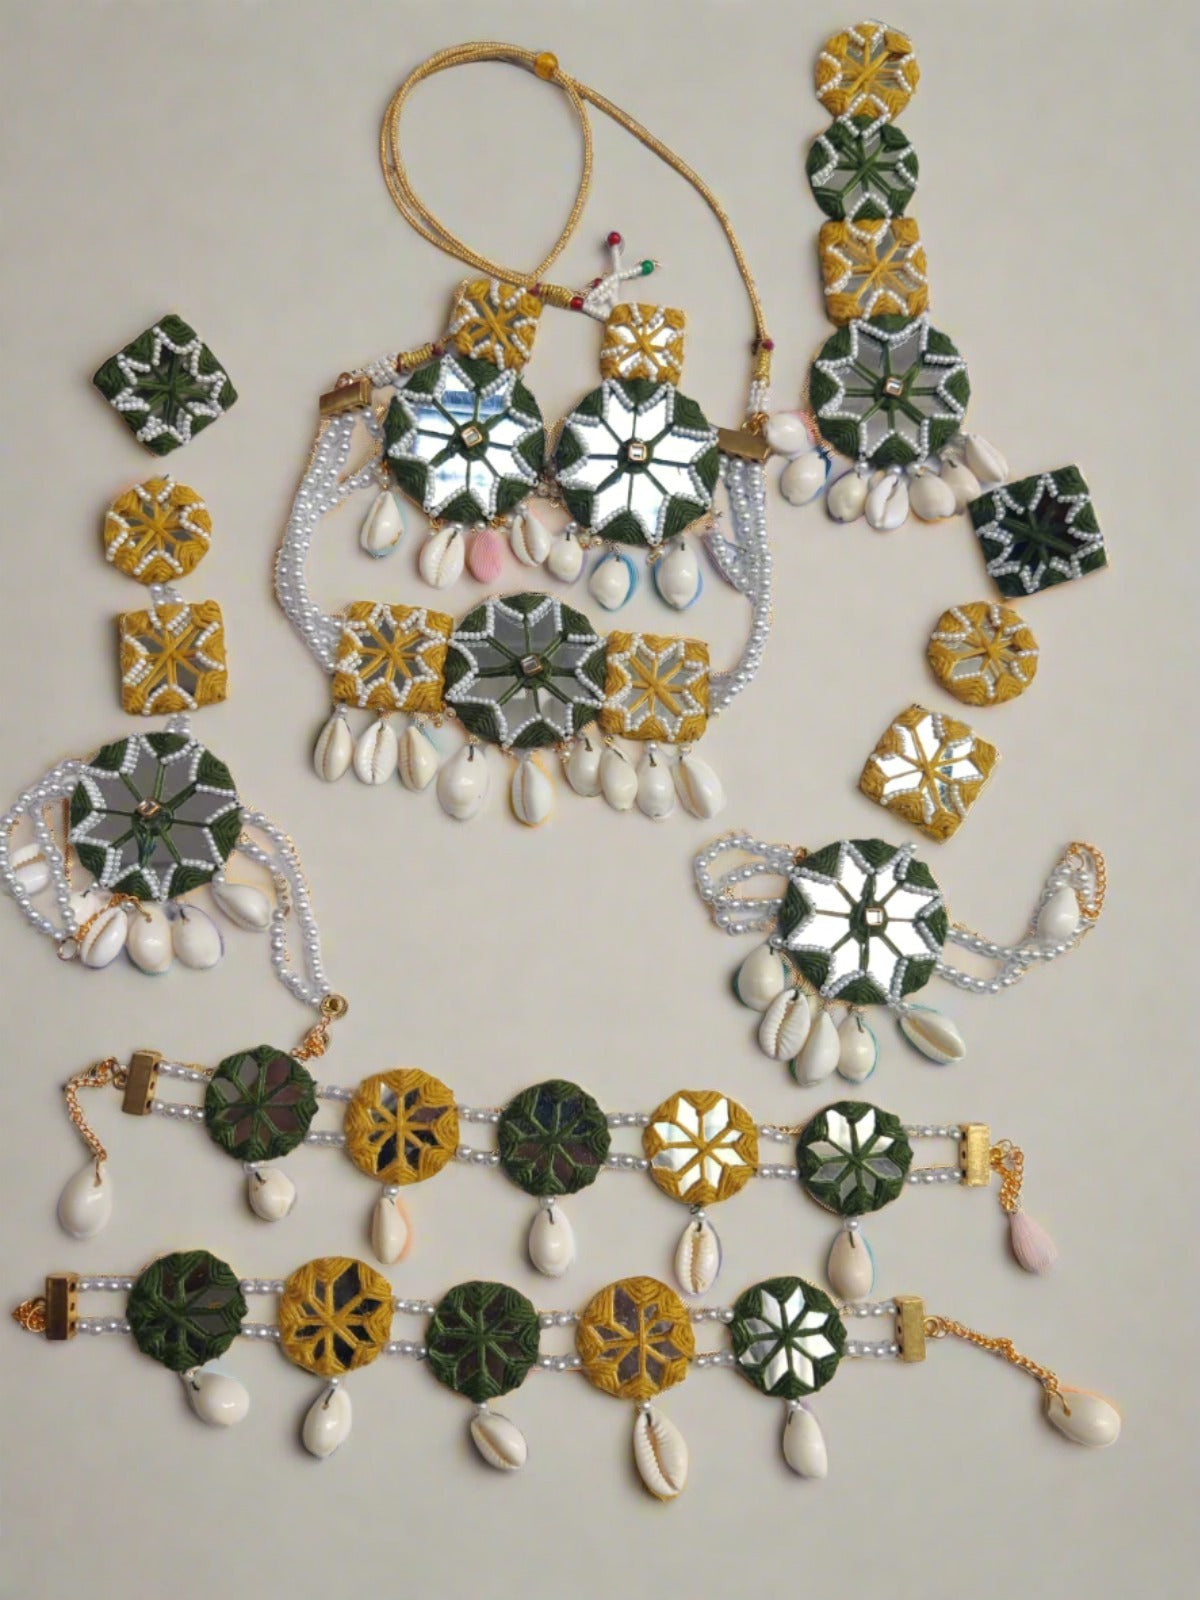 Yellow and green mirror necklace, bracelet, earrings, tika and anklet set on white backdrop